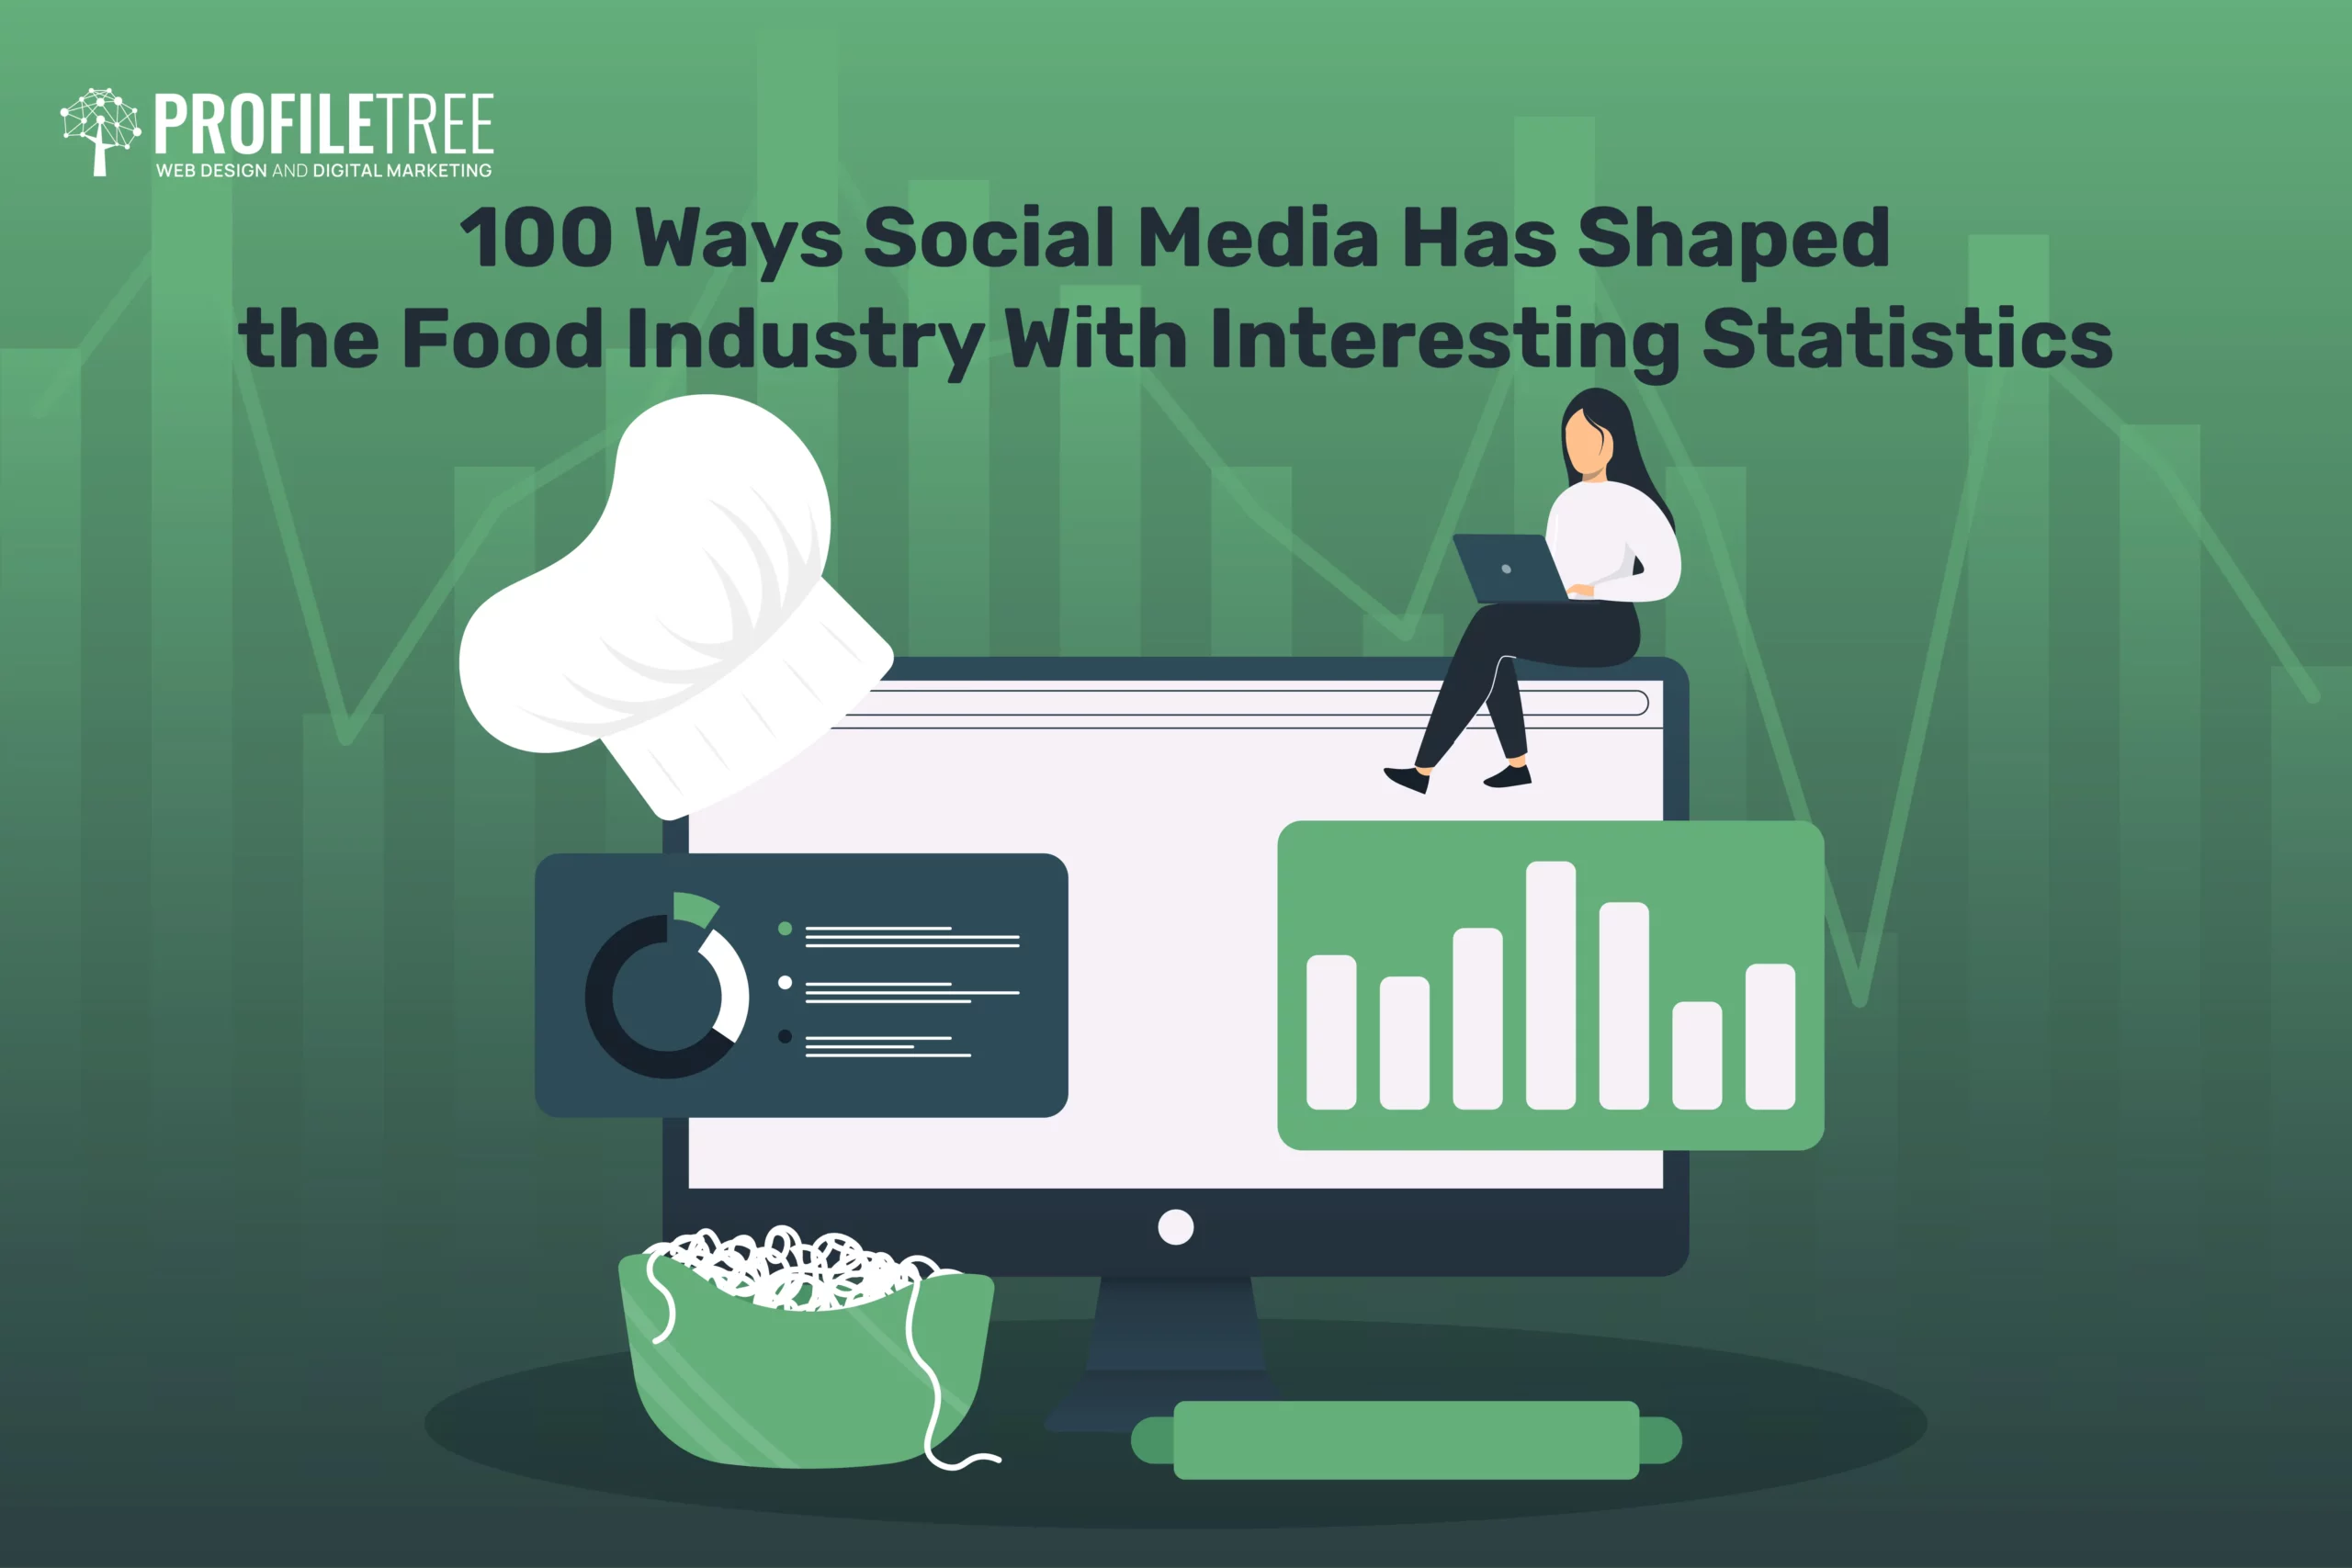 Food Industry and social media